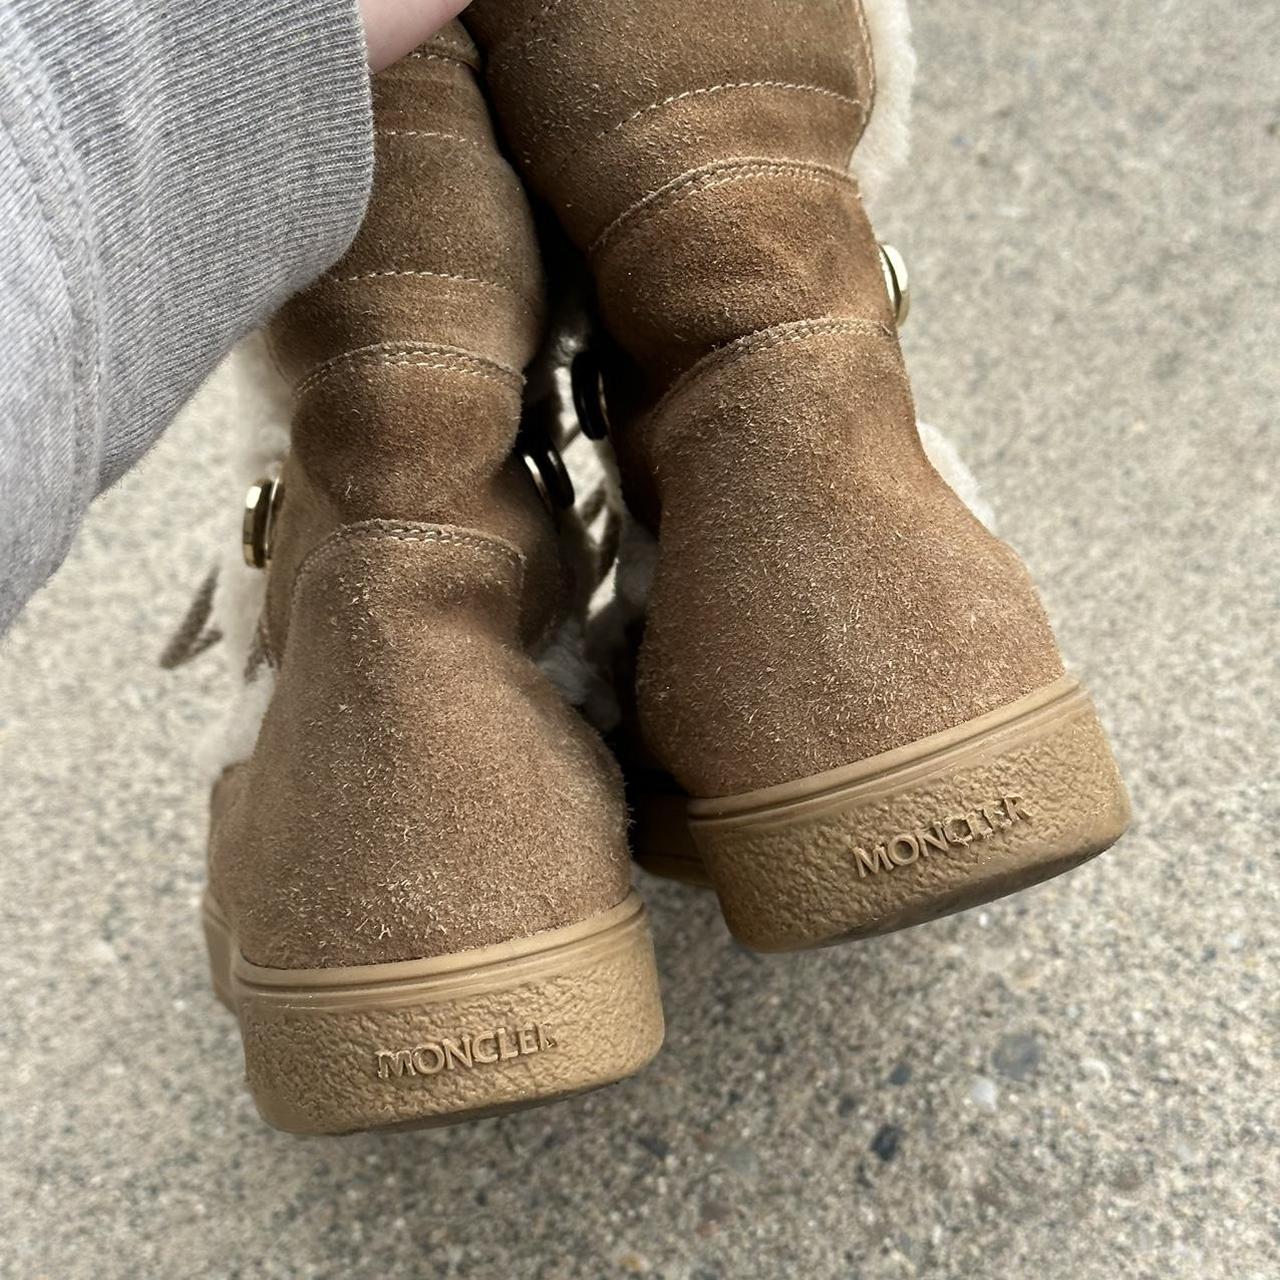 Moncler Women's Tan and Brown Boots | Depop